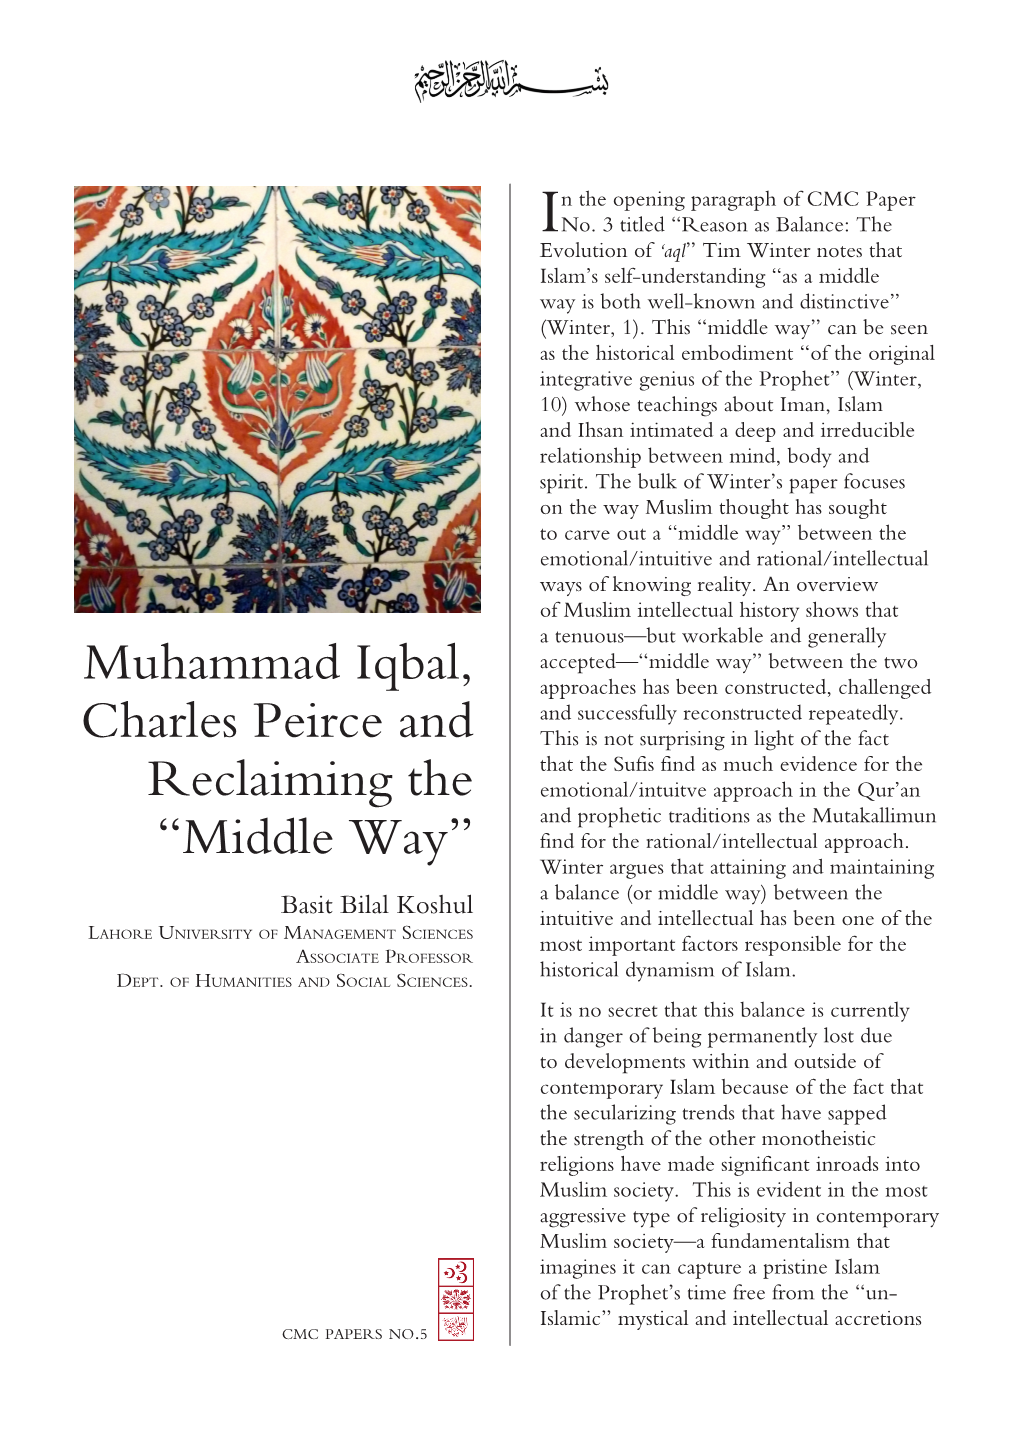 Muhammad Iqbal, Charles Peirce and Reclaiming the “Middle Way”